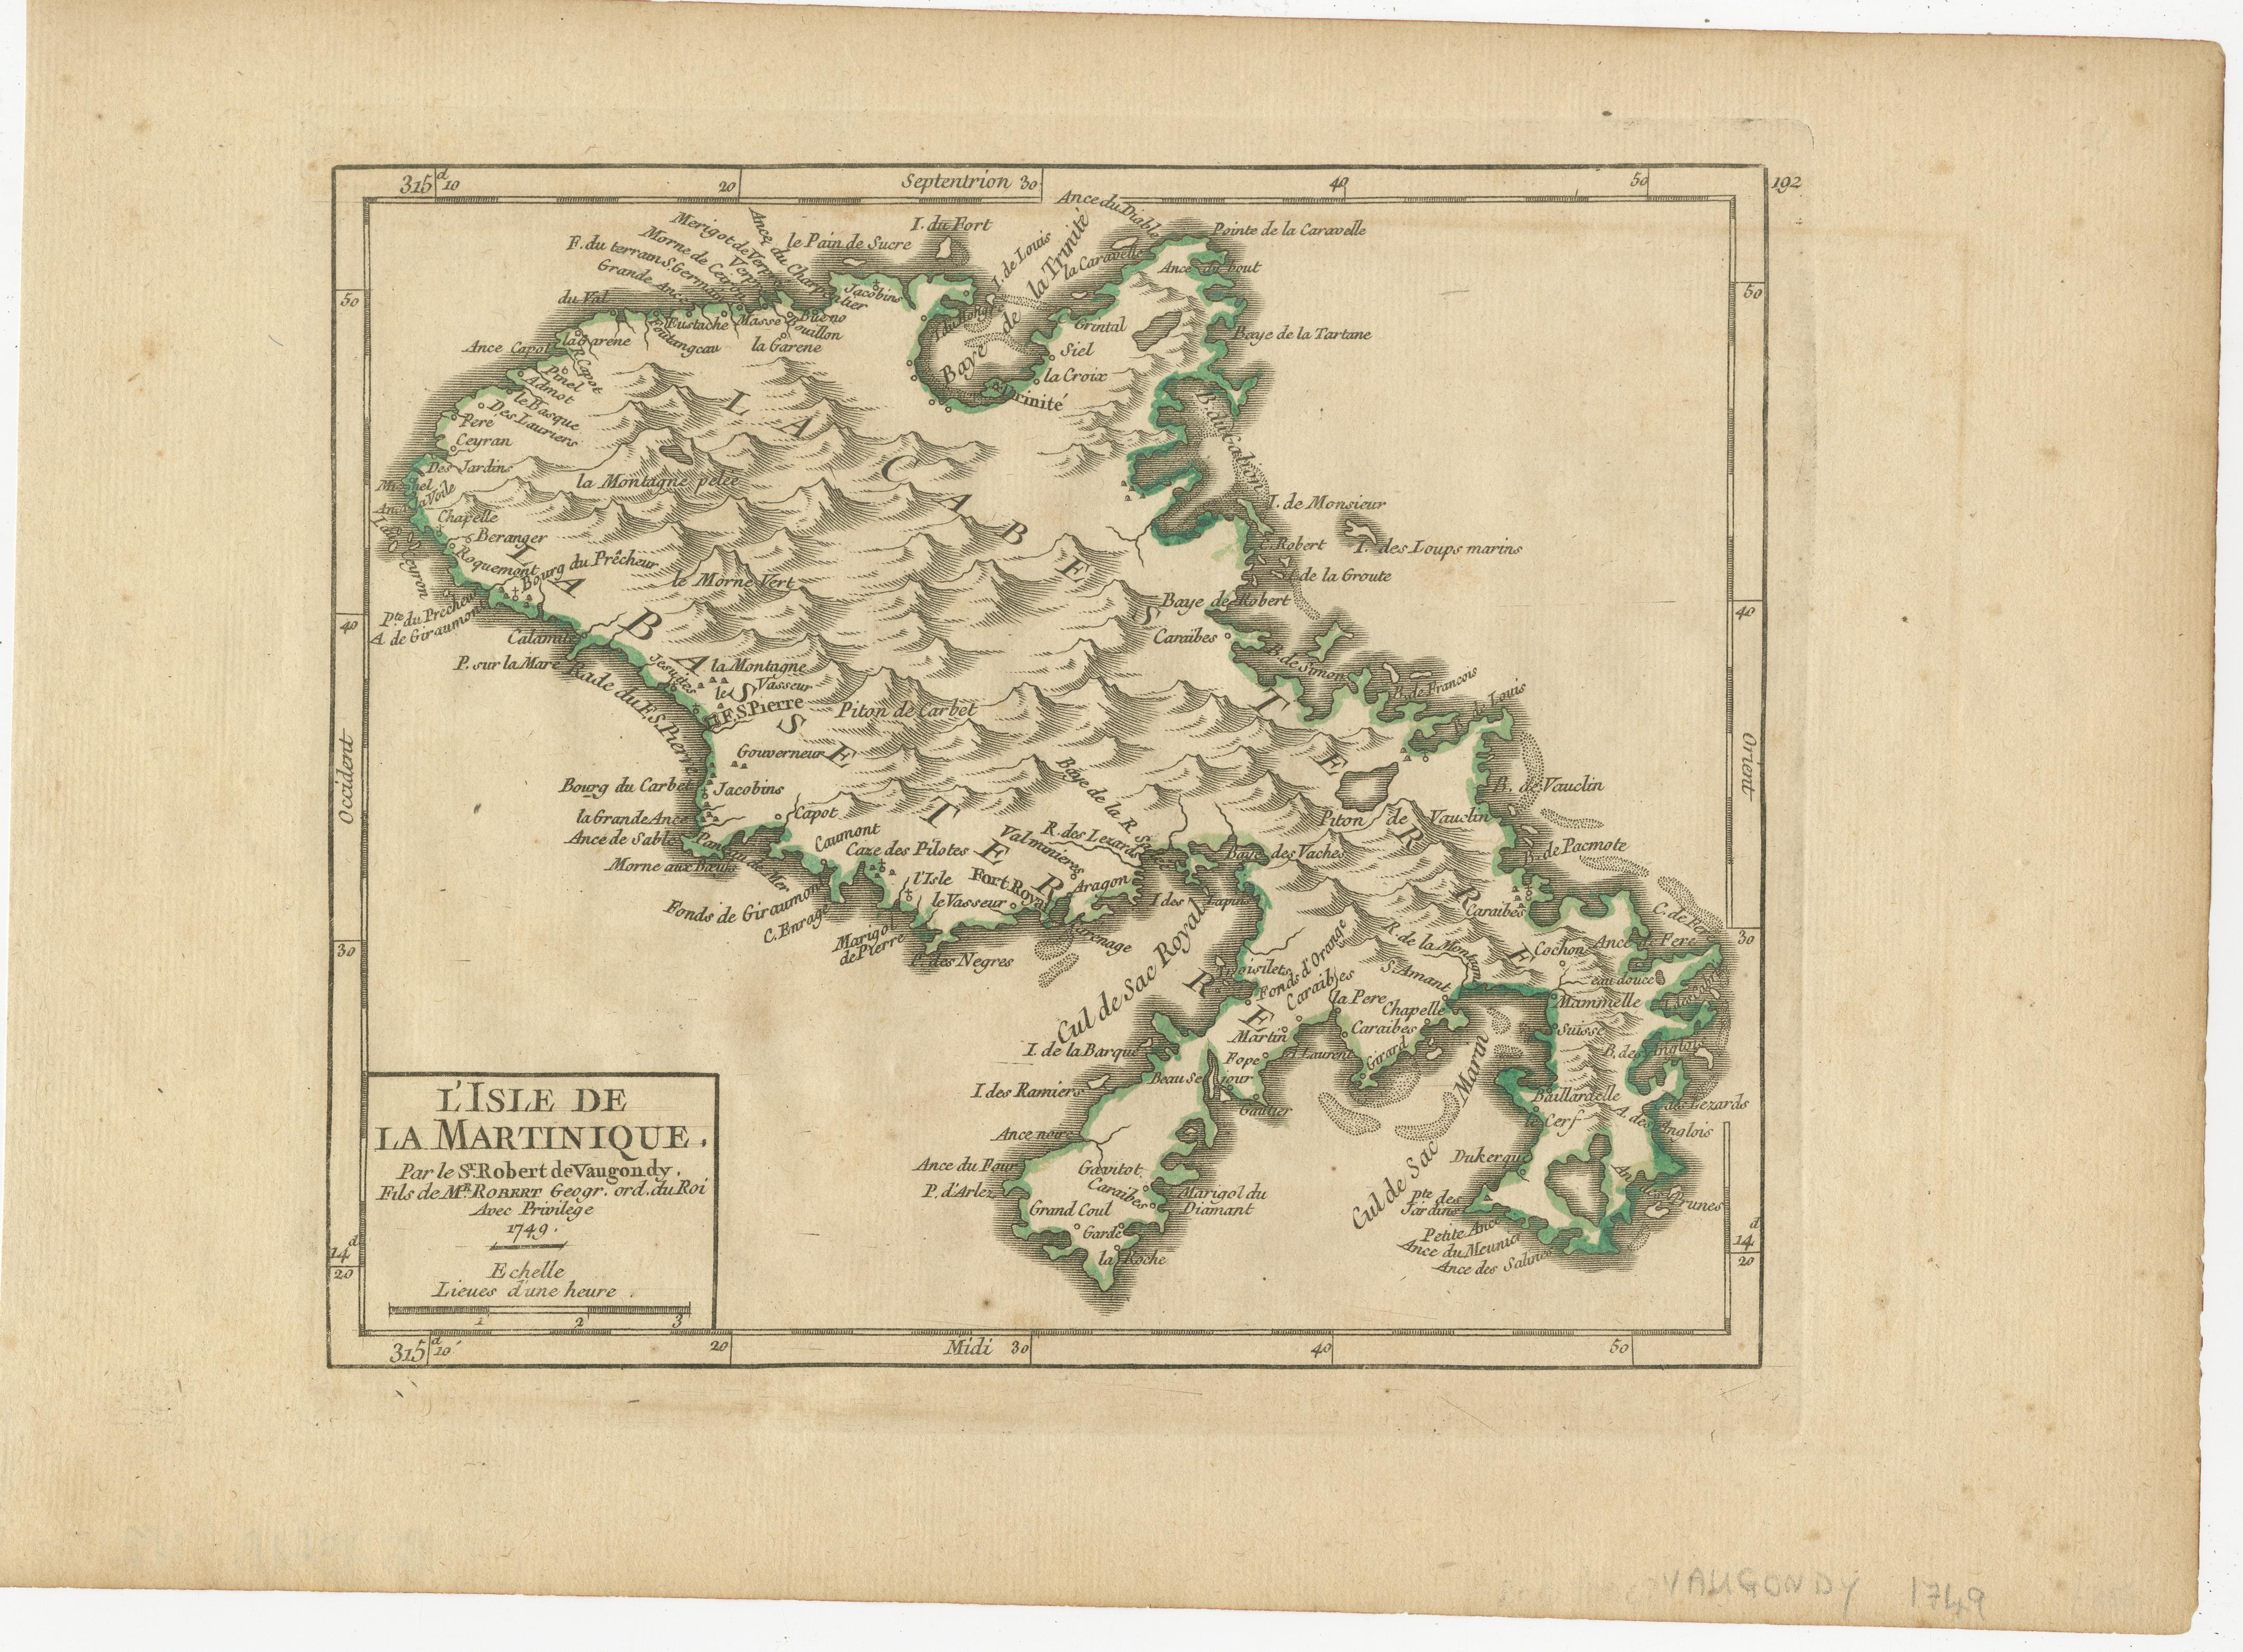 Description: De Vaugondy's map of Martinique, initially published in Paris in 1748 within his Atlas Portatif,  Universel et Militaire, stands as a striking representation of the island's topography.

This cartographic masterpiece offers a detailed